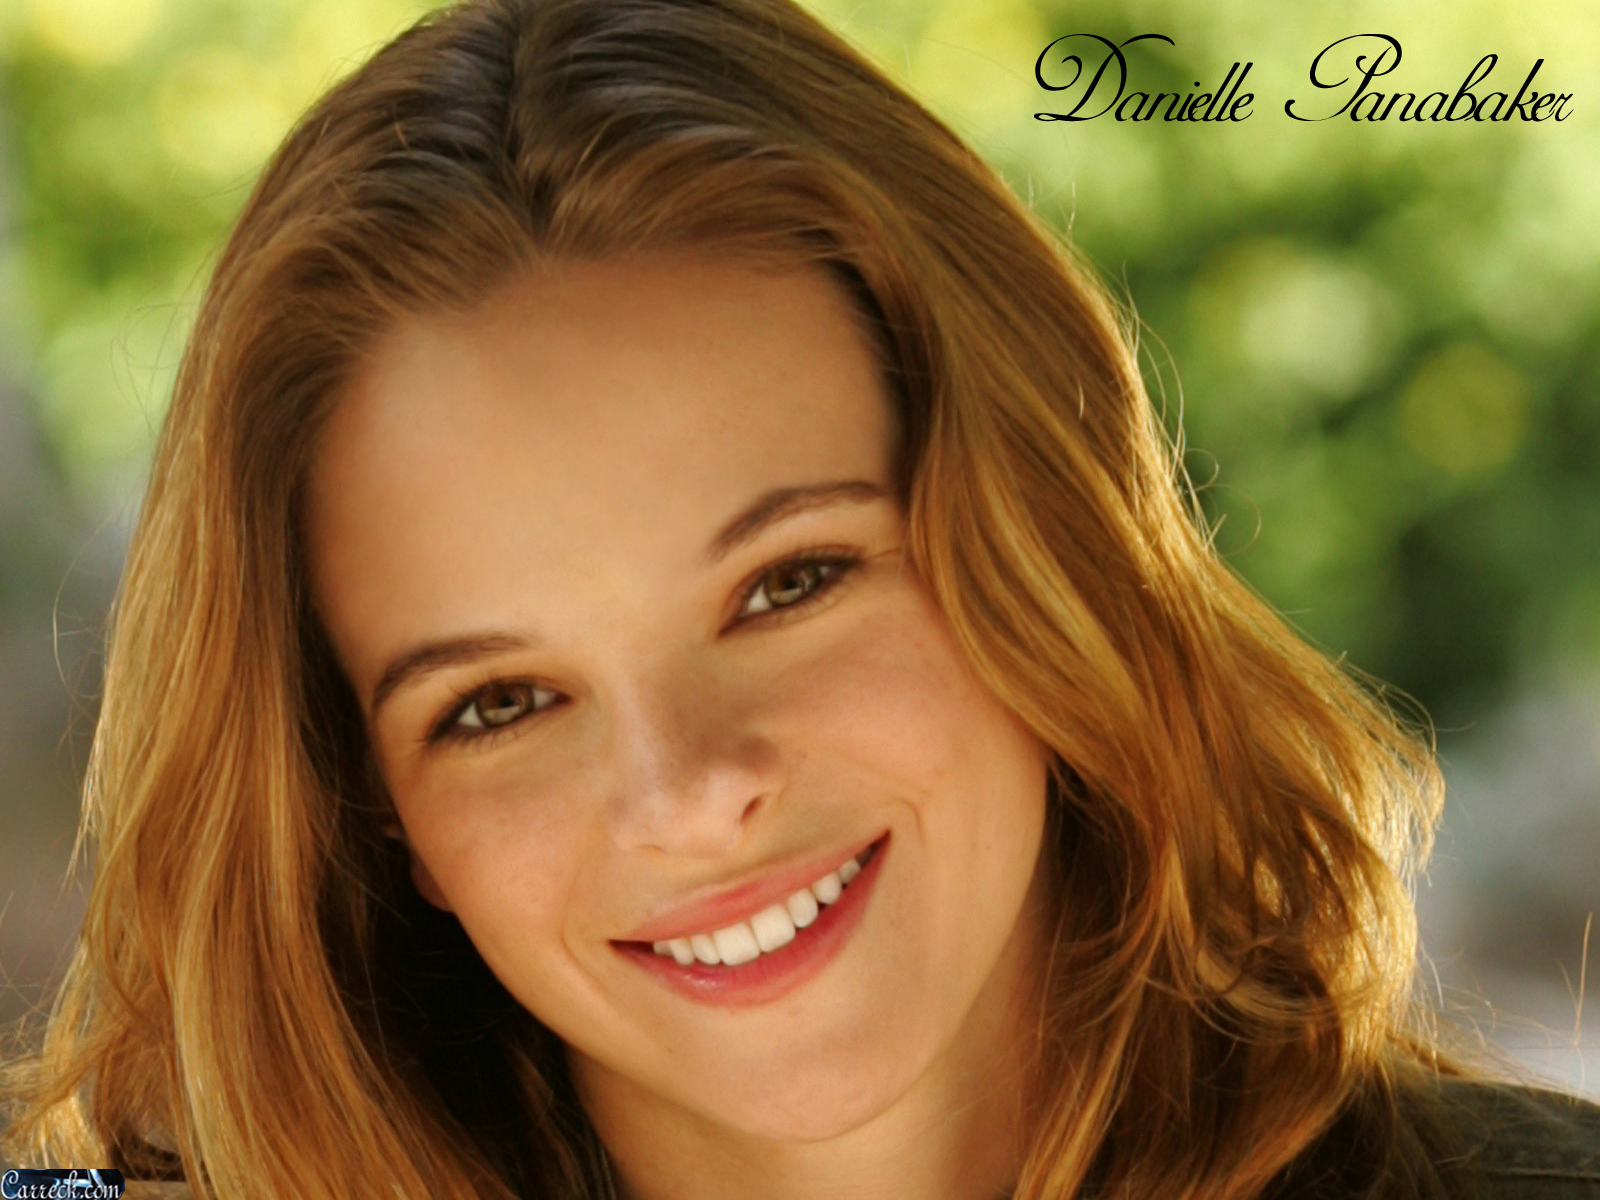 Life: People: Danielle Panabaker (1987- )1600 x 1200